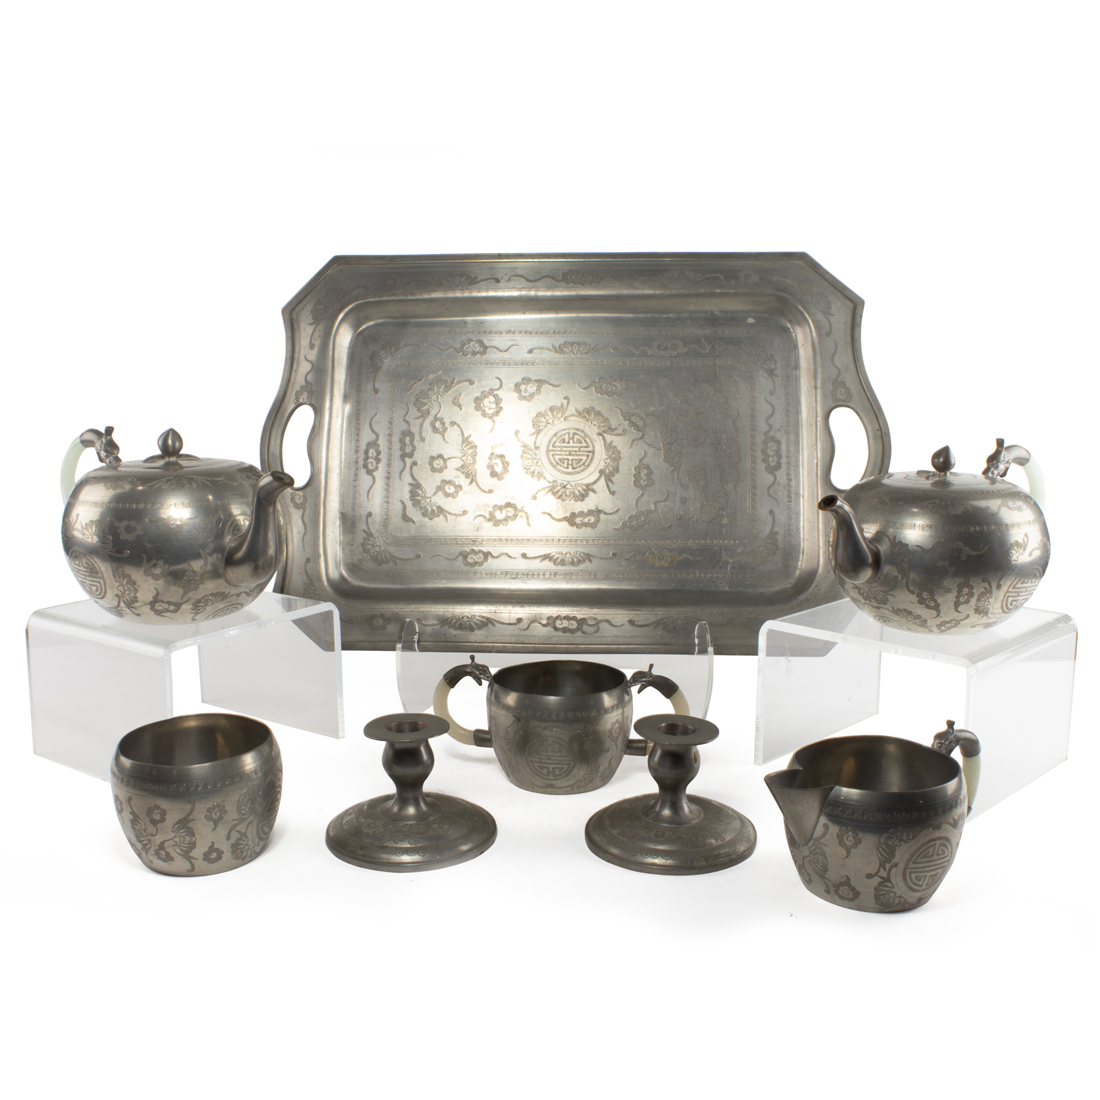 CHINESE PEWTER TEA SERVICE Chinese pewter